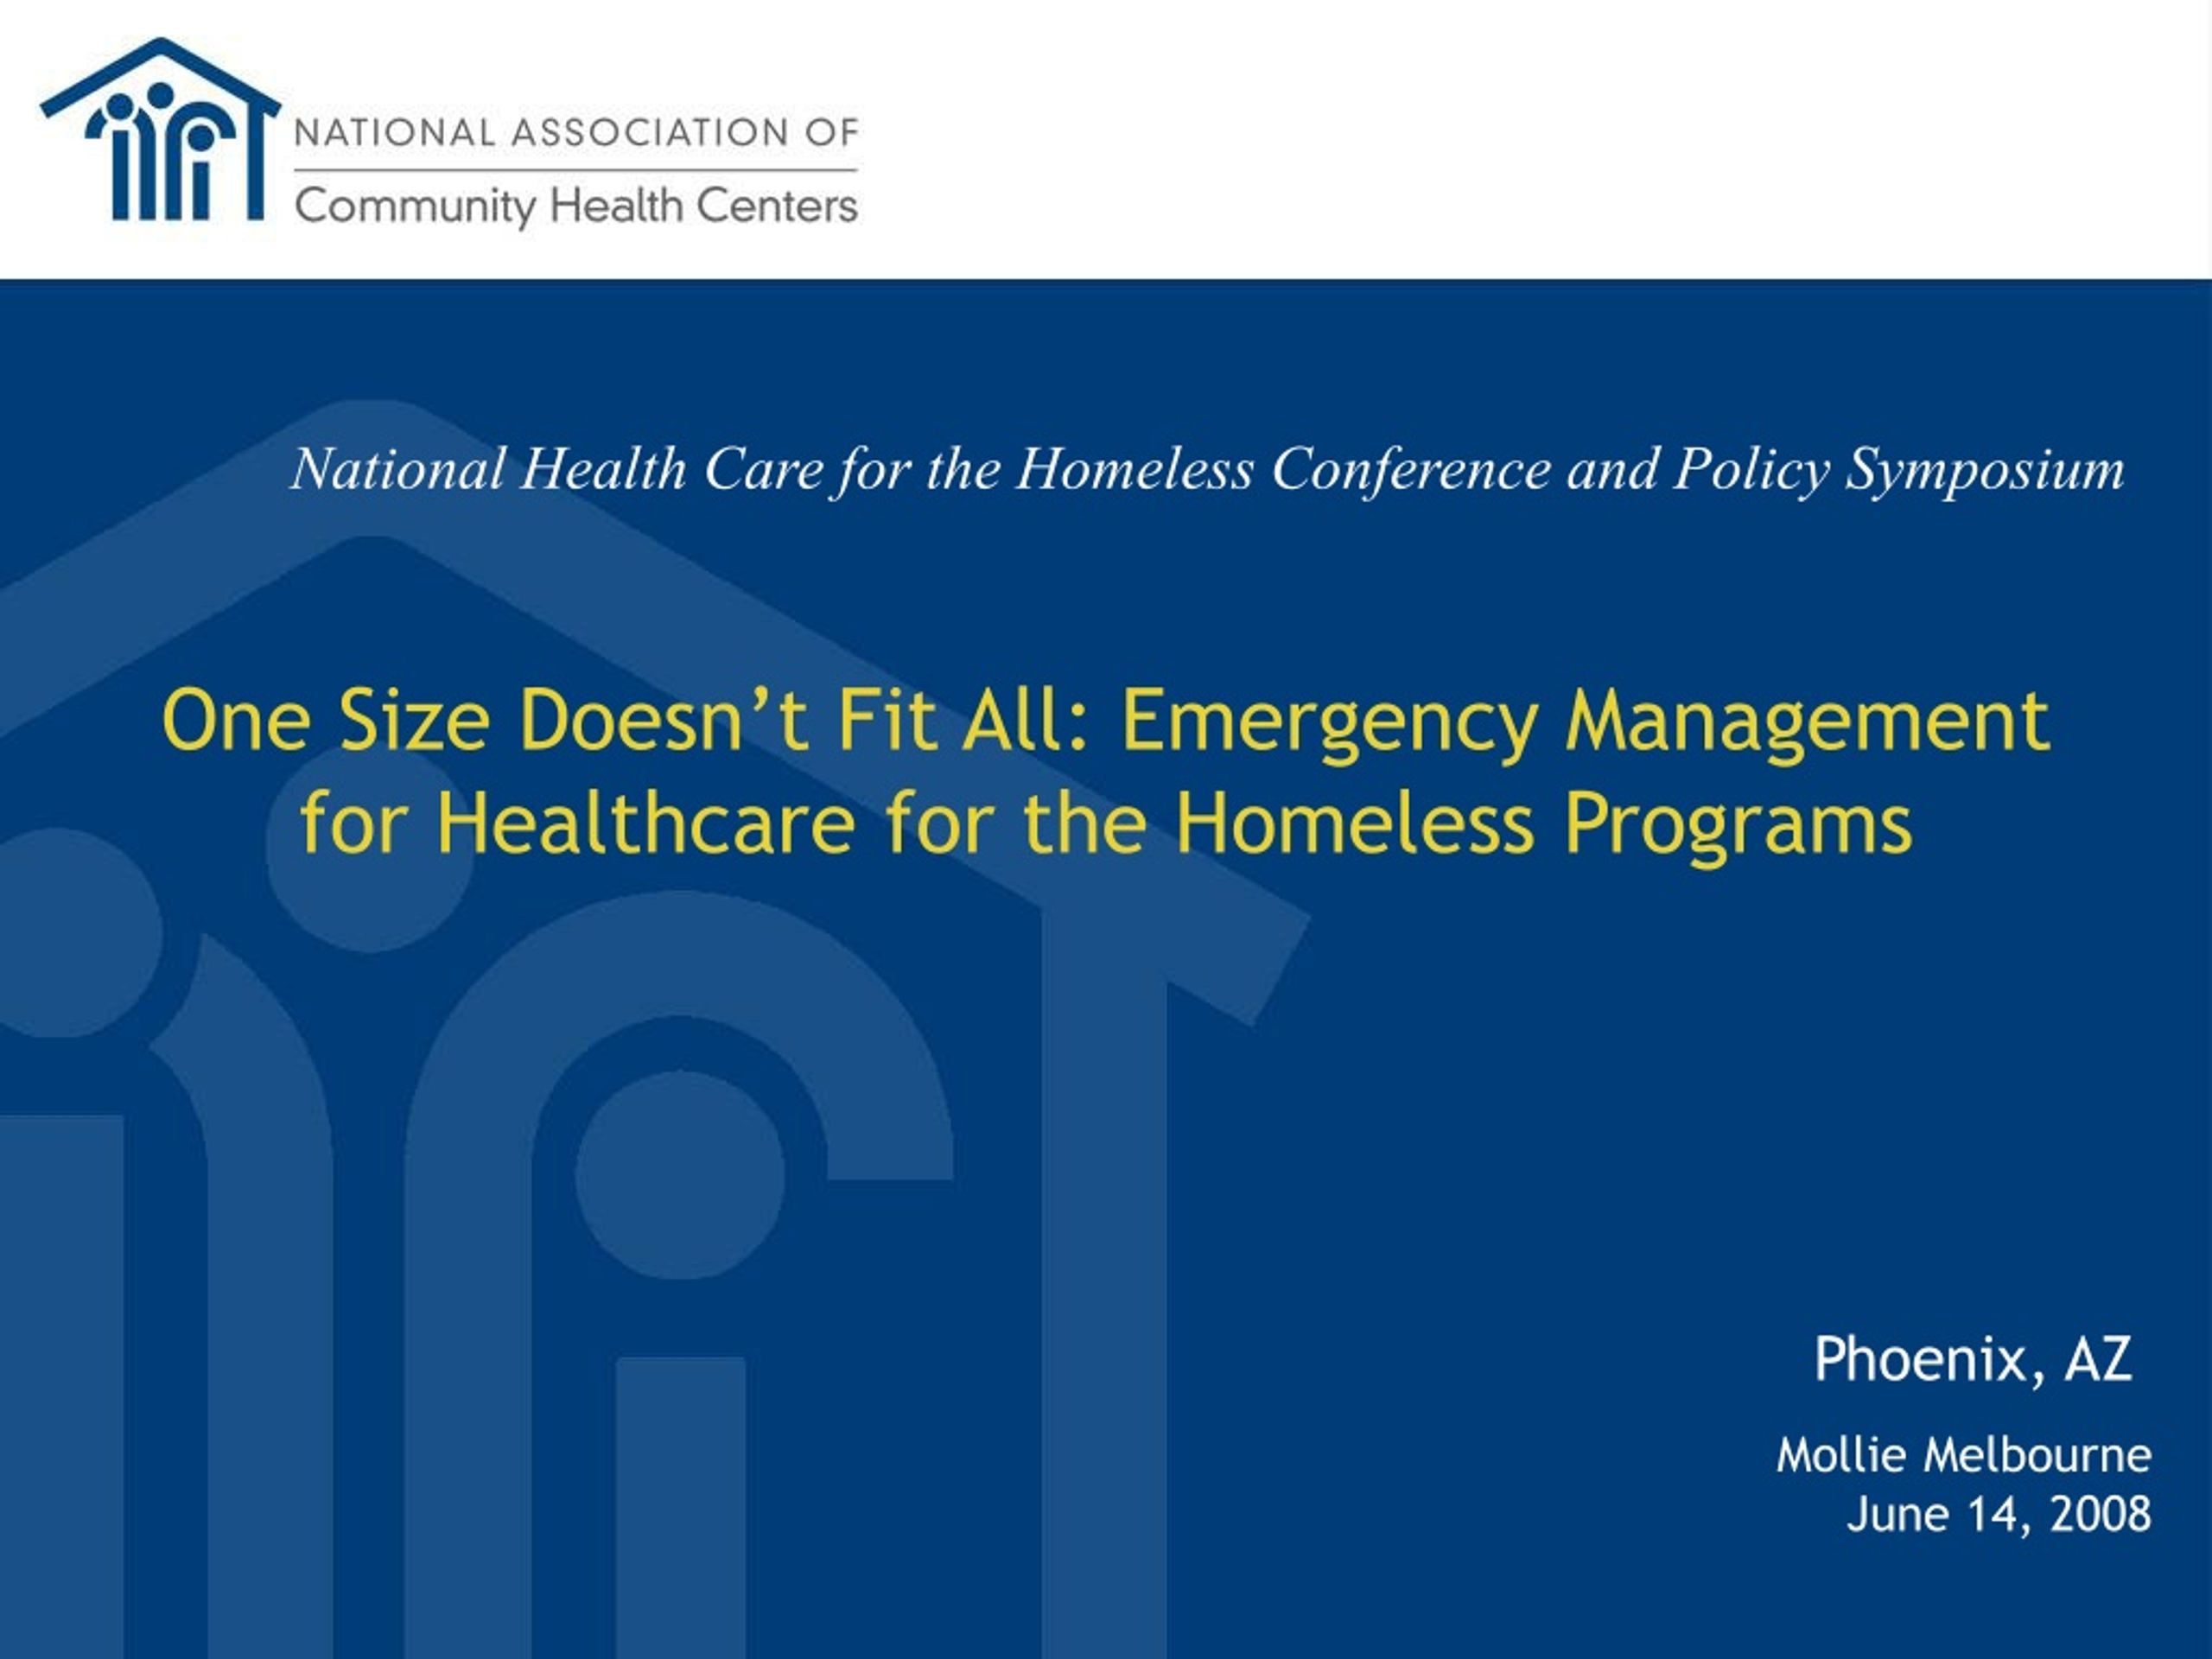 PPT National Health Care for the Homeless Conference and Policy